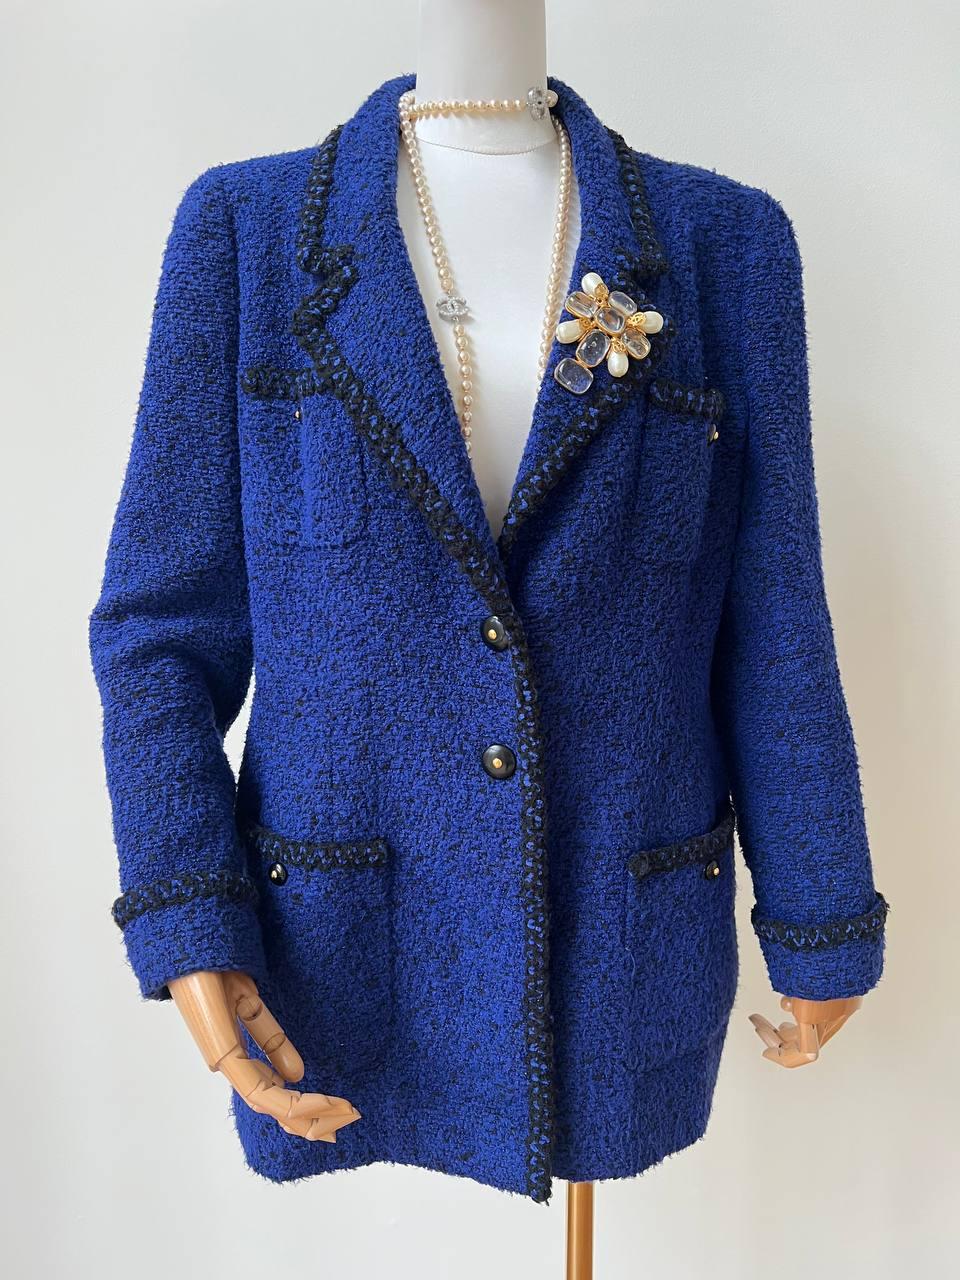 Vintage Blue Tweed Double-breasted Chanel Jacket, 1995 10